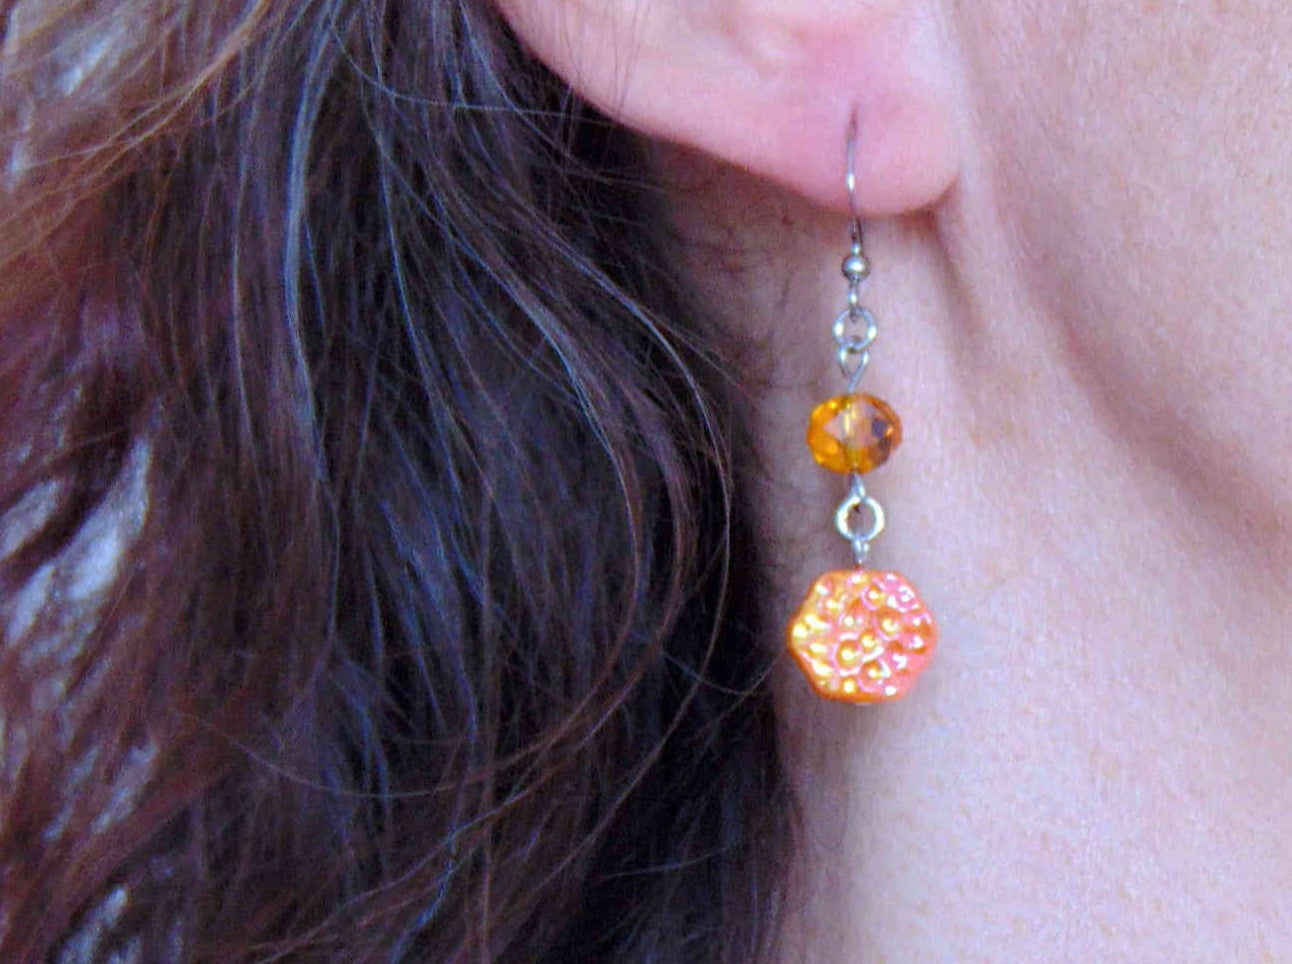 Long earrings with vintage iridescent textured glass hexagons, assorted crystals, available in 3 bright colours (orange, turquoise, fuchsia), stainless steel hooks